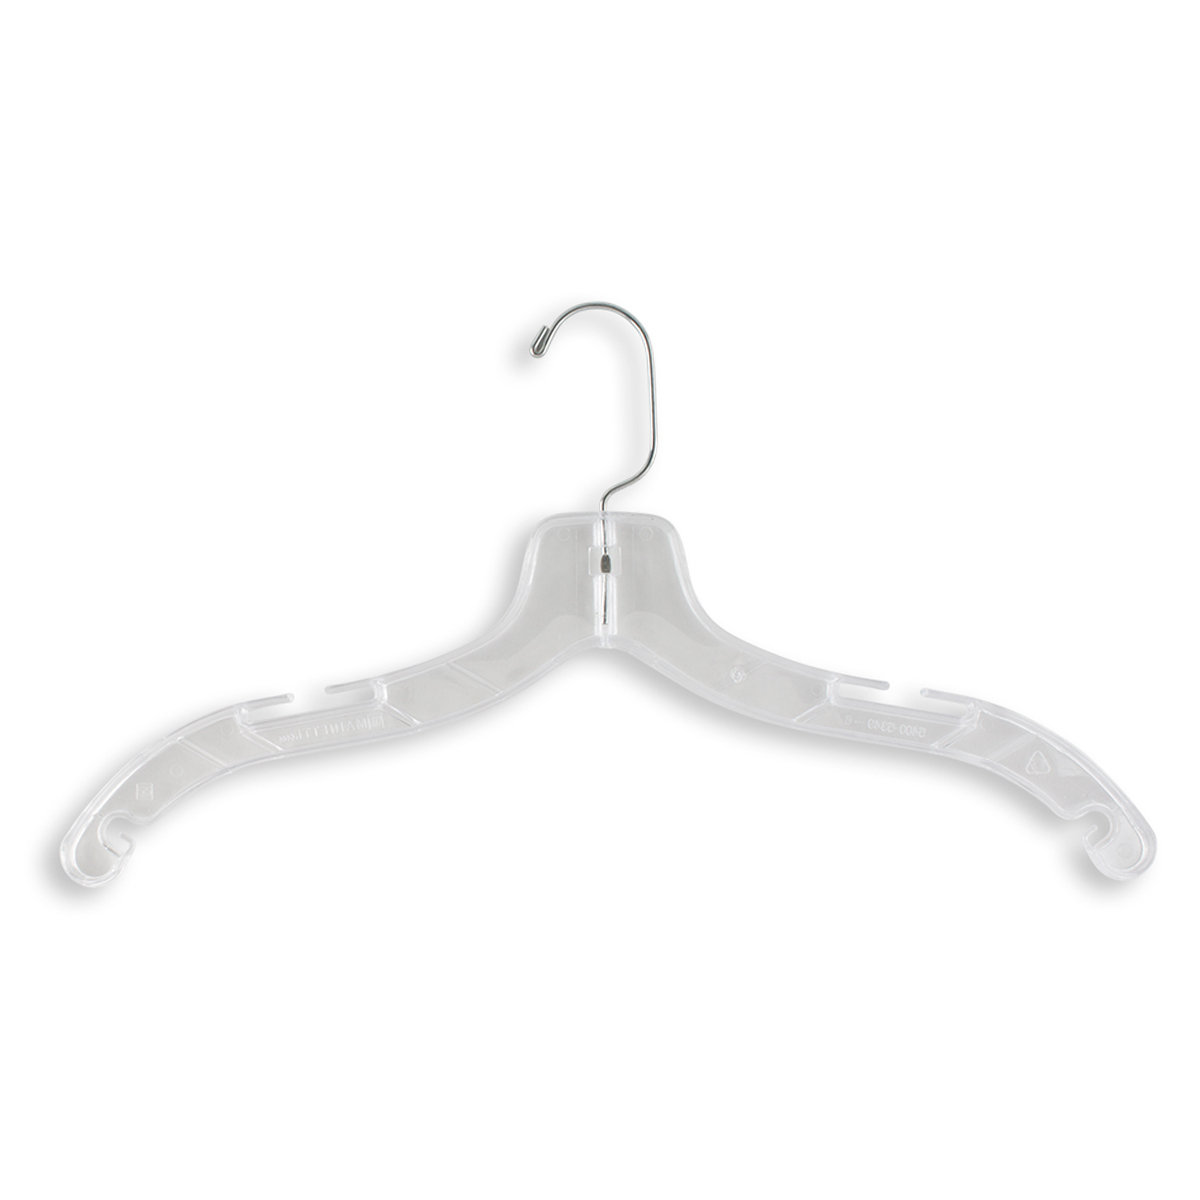 Plastic Dress Hangers - 17 Length/ 4 15/16 Neck - 100/Box - Clear -  Cleaner's Supply